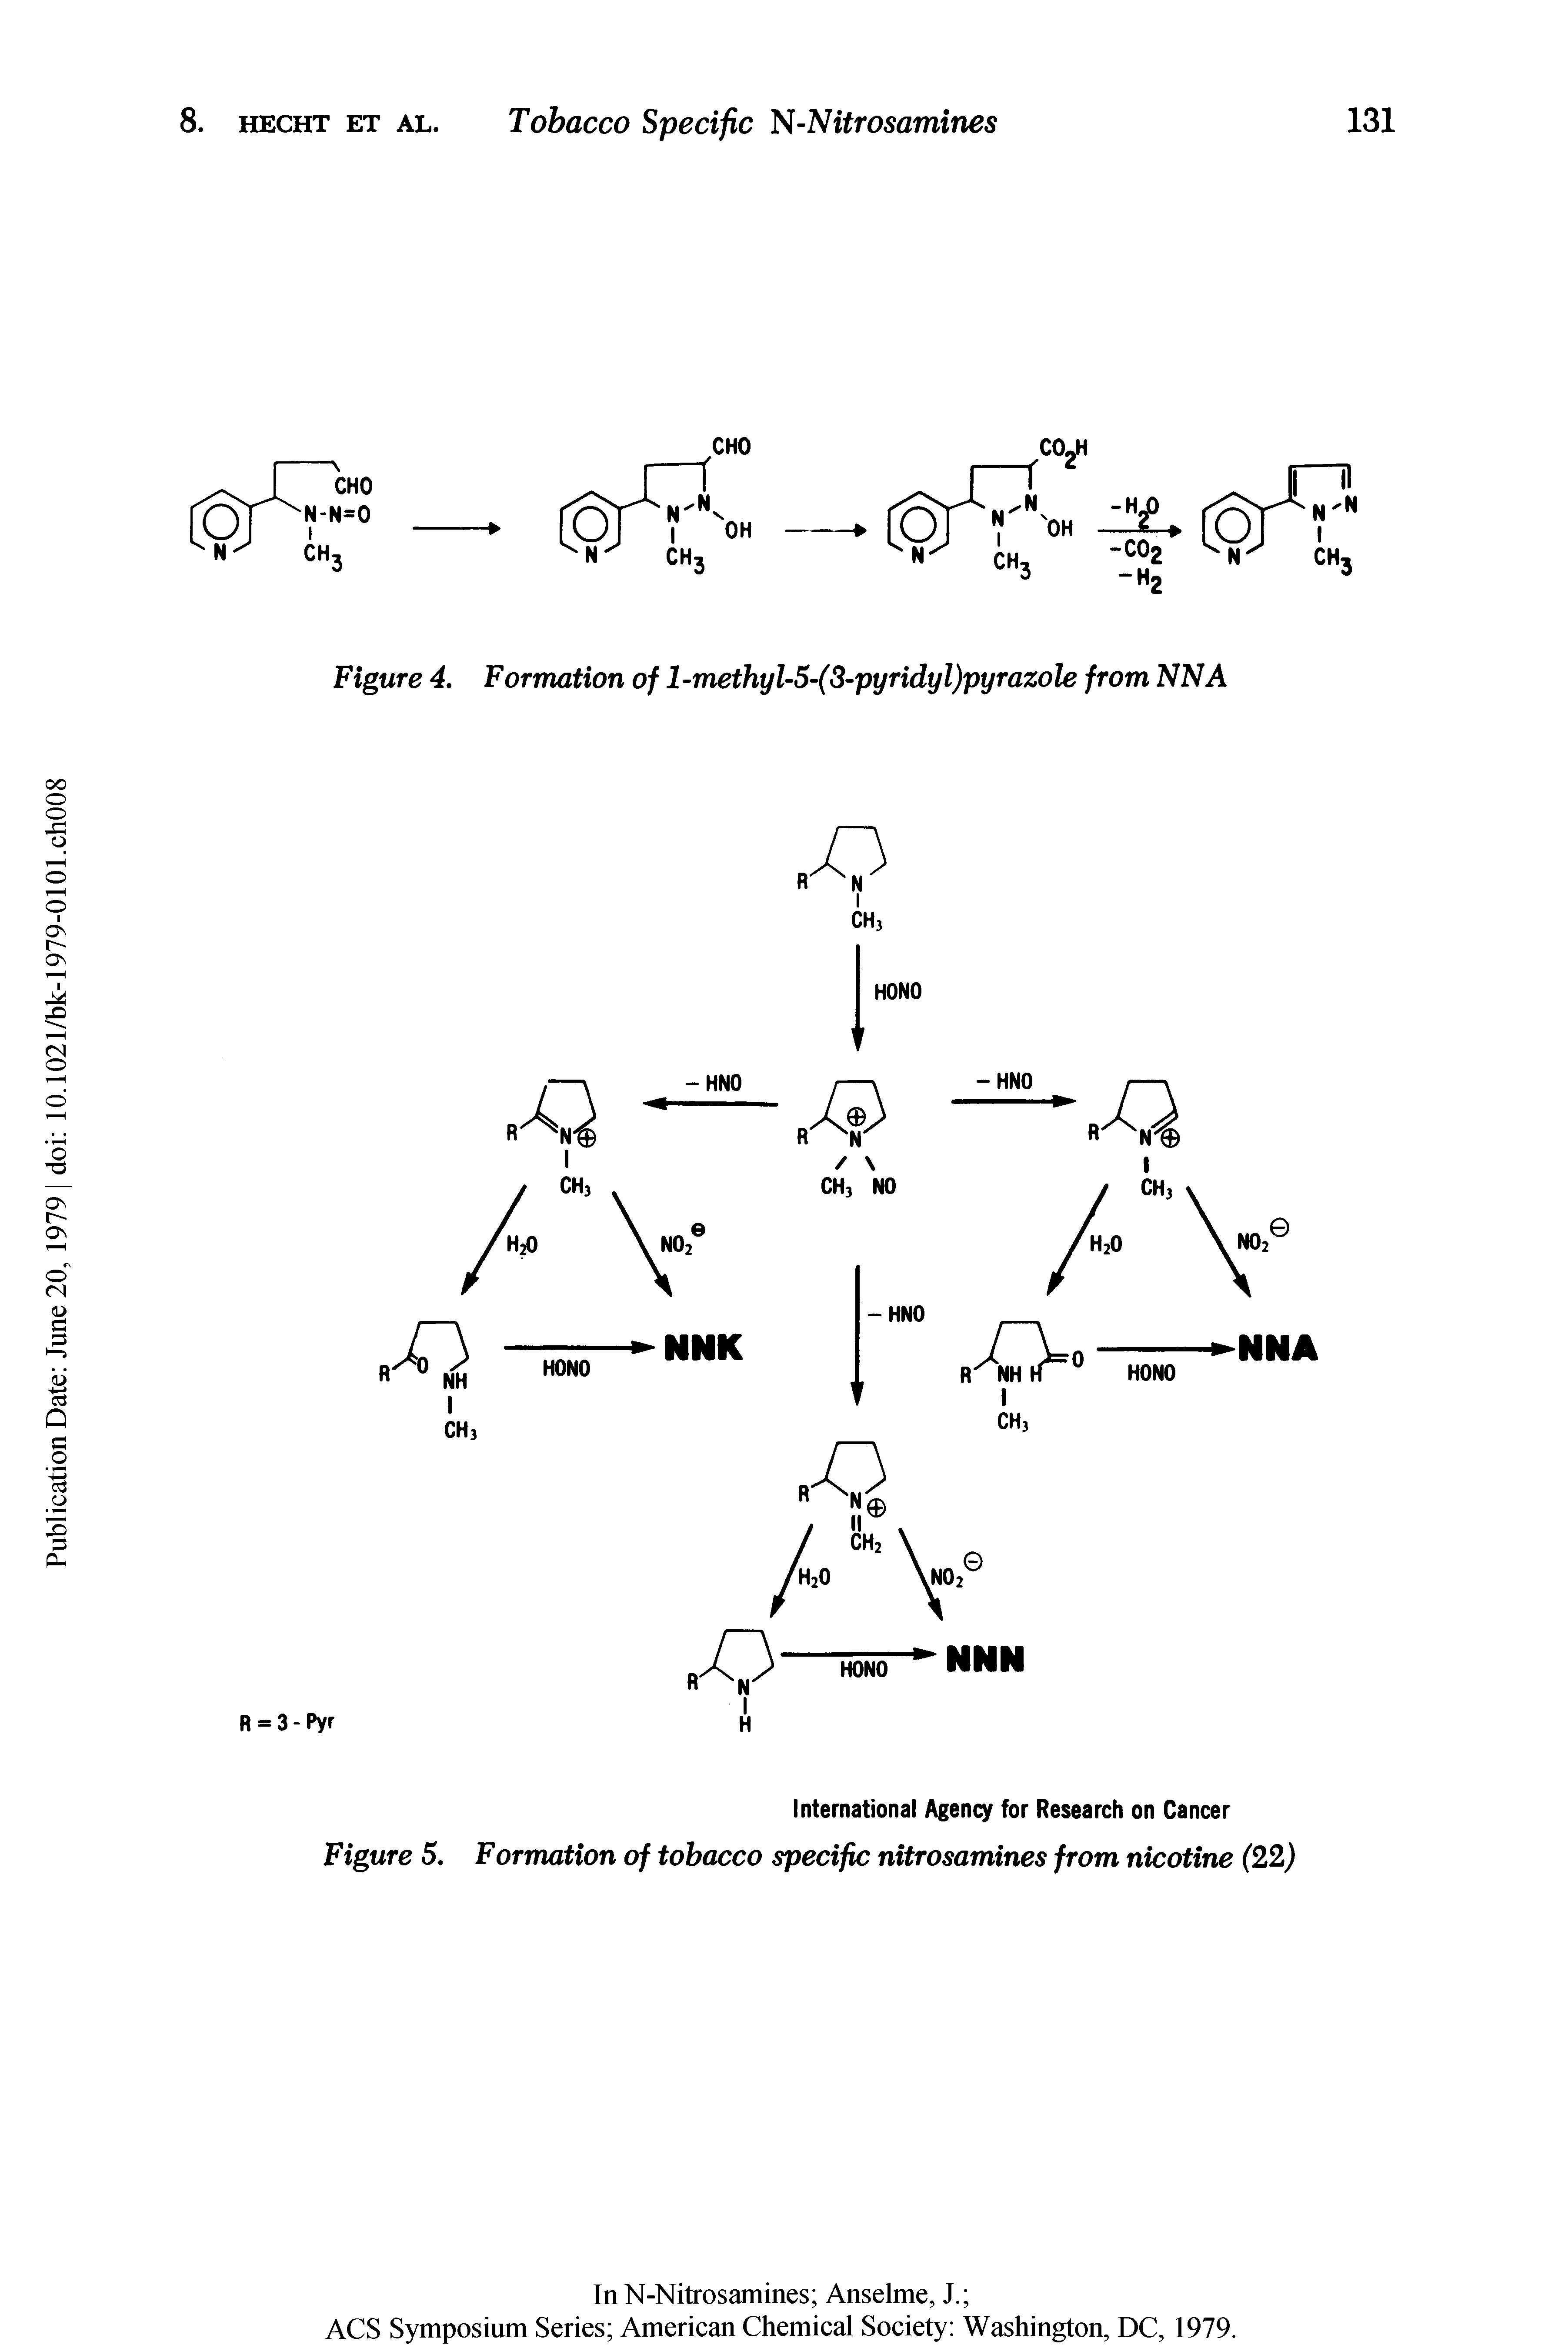 Figure 4. Formation of l-methyl-5-(3-pyridyl)pyrazole from NNA...